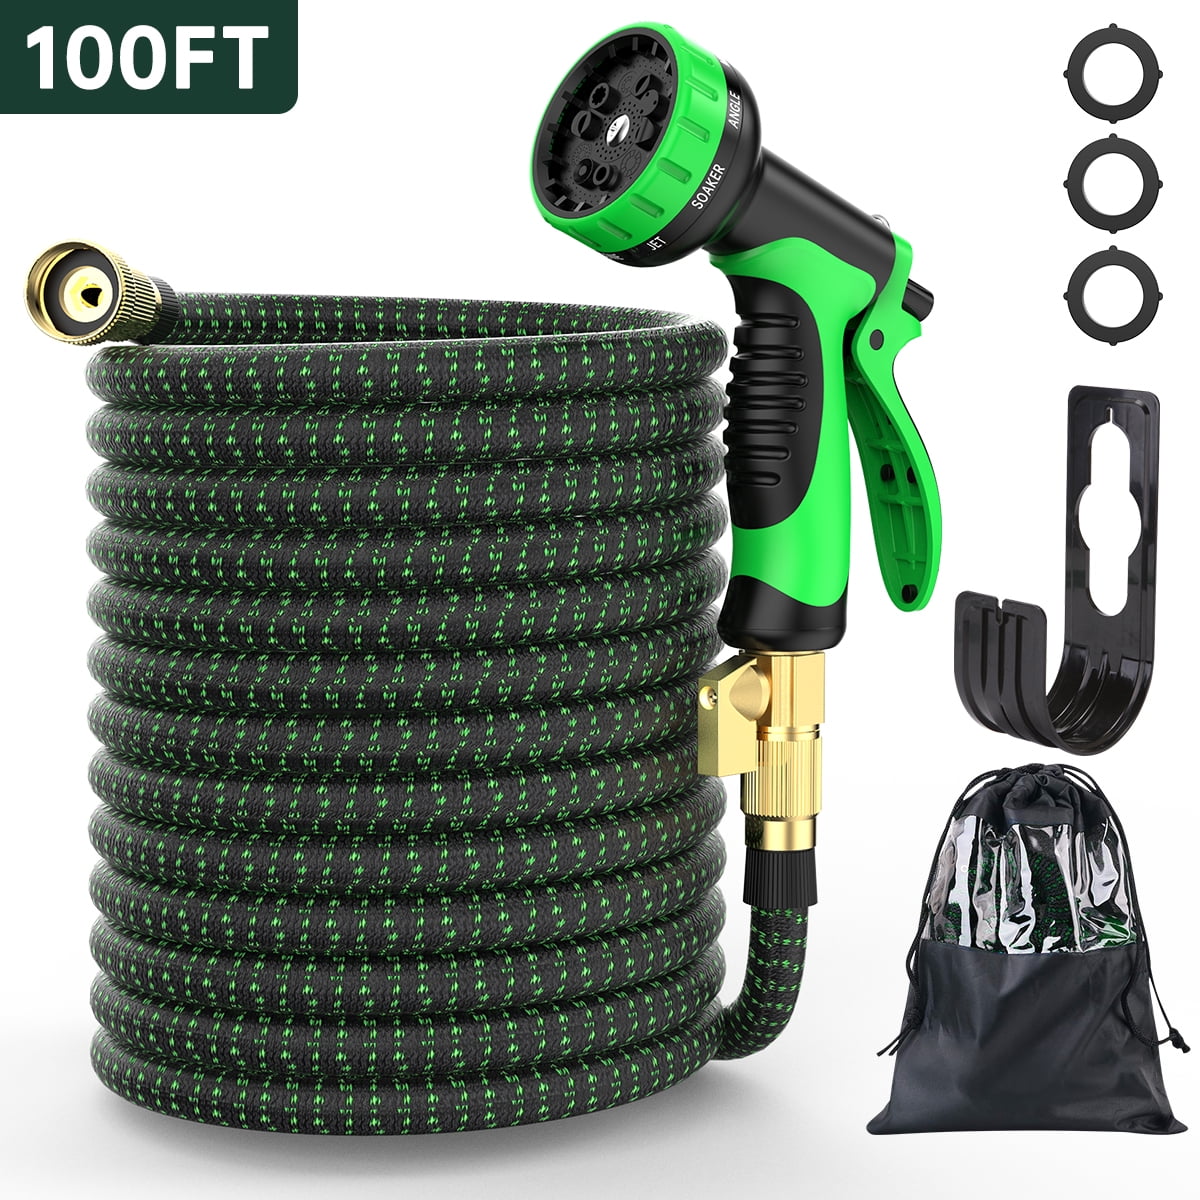 50ft Expandable Garden Hose Lightweight Water Hose with 10 Function Nozzle HOT 